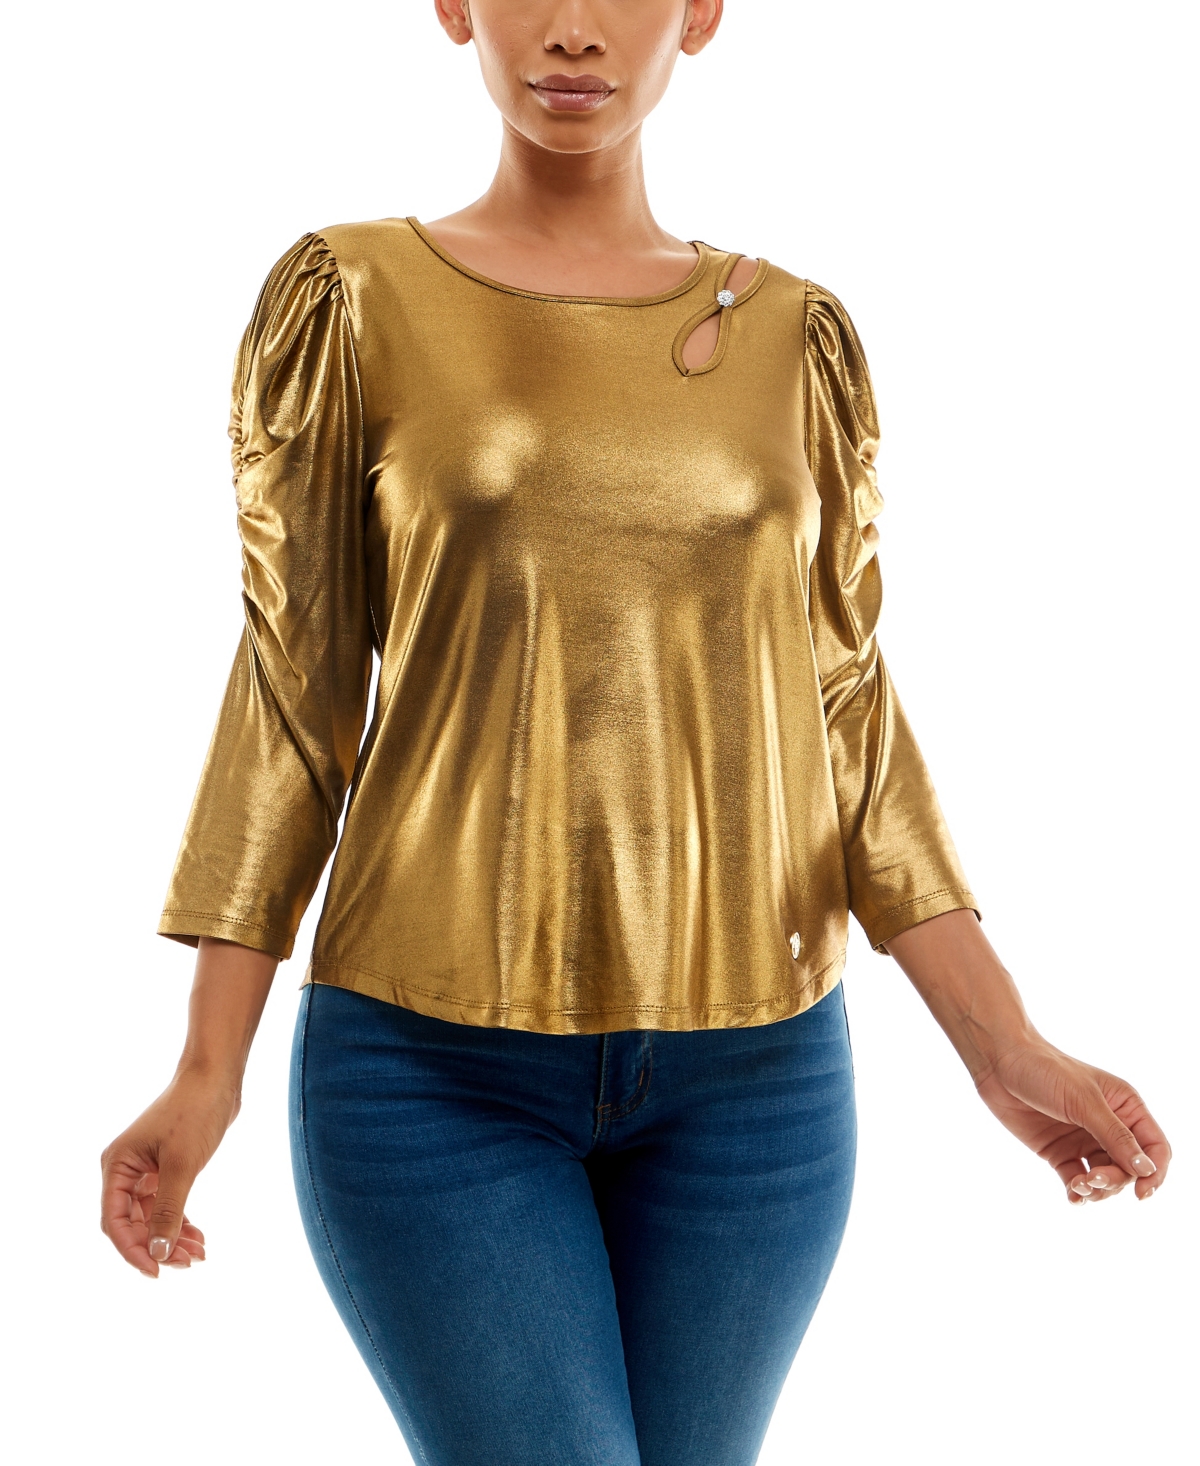 Adrienne Vittadini Women's 3/4 Shirred Sleeve Top With Cut Out Detail At The Shoulder In Gold Metallic